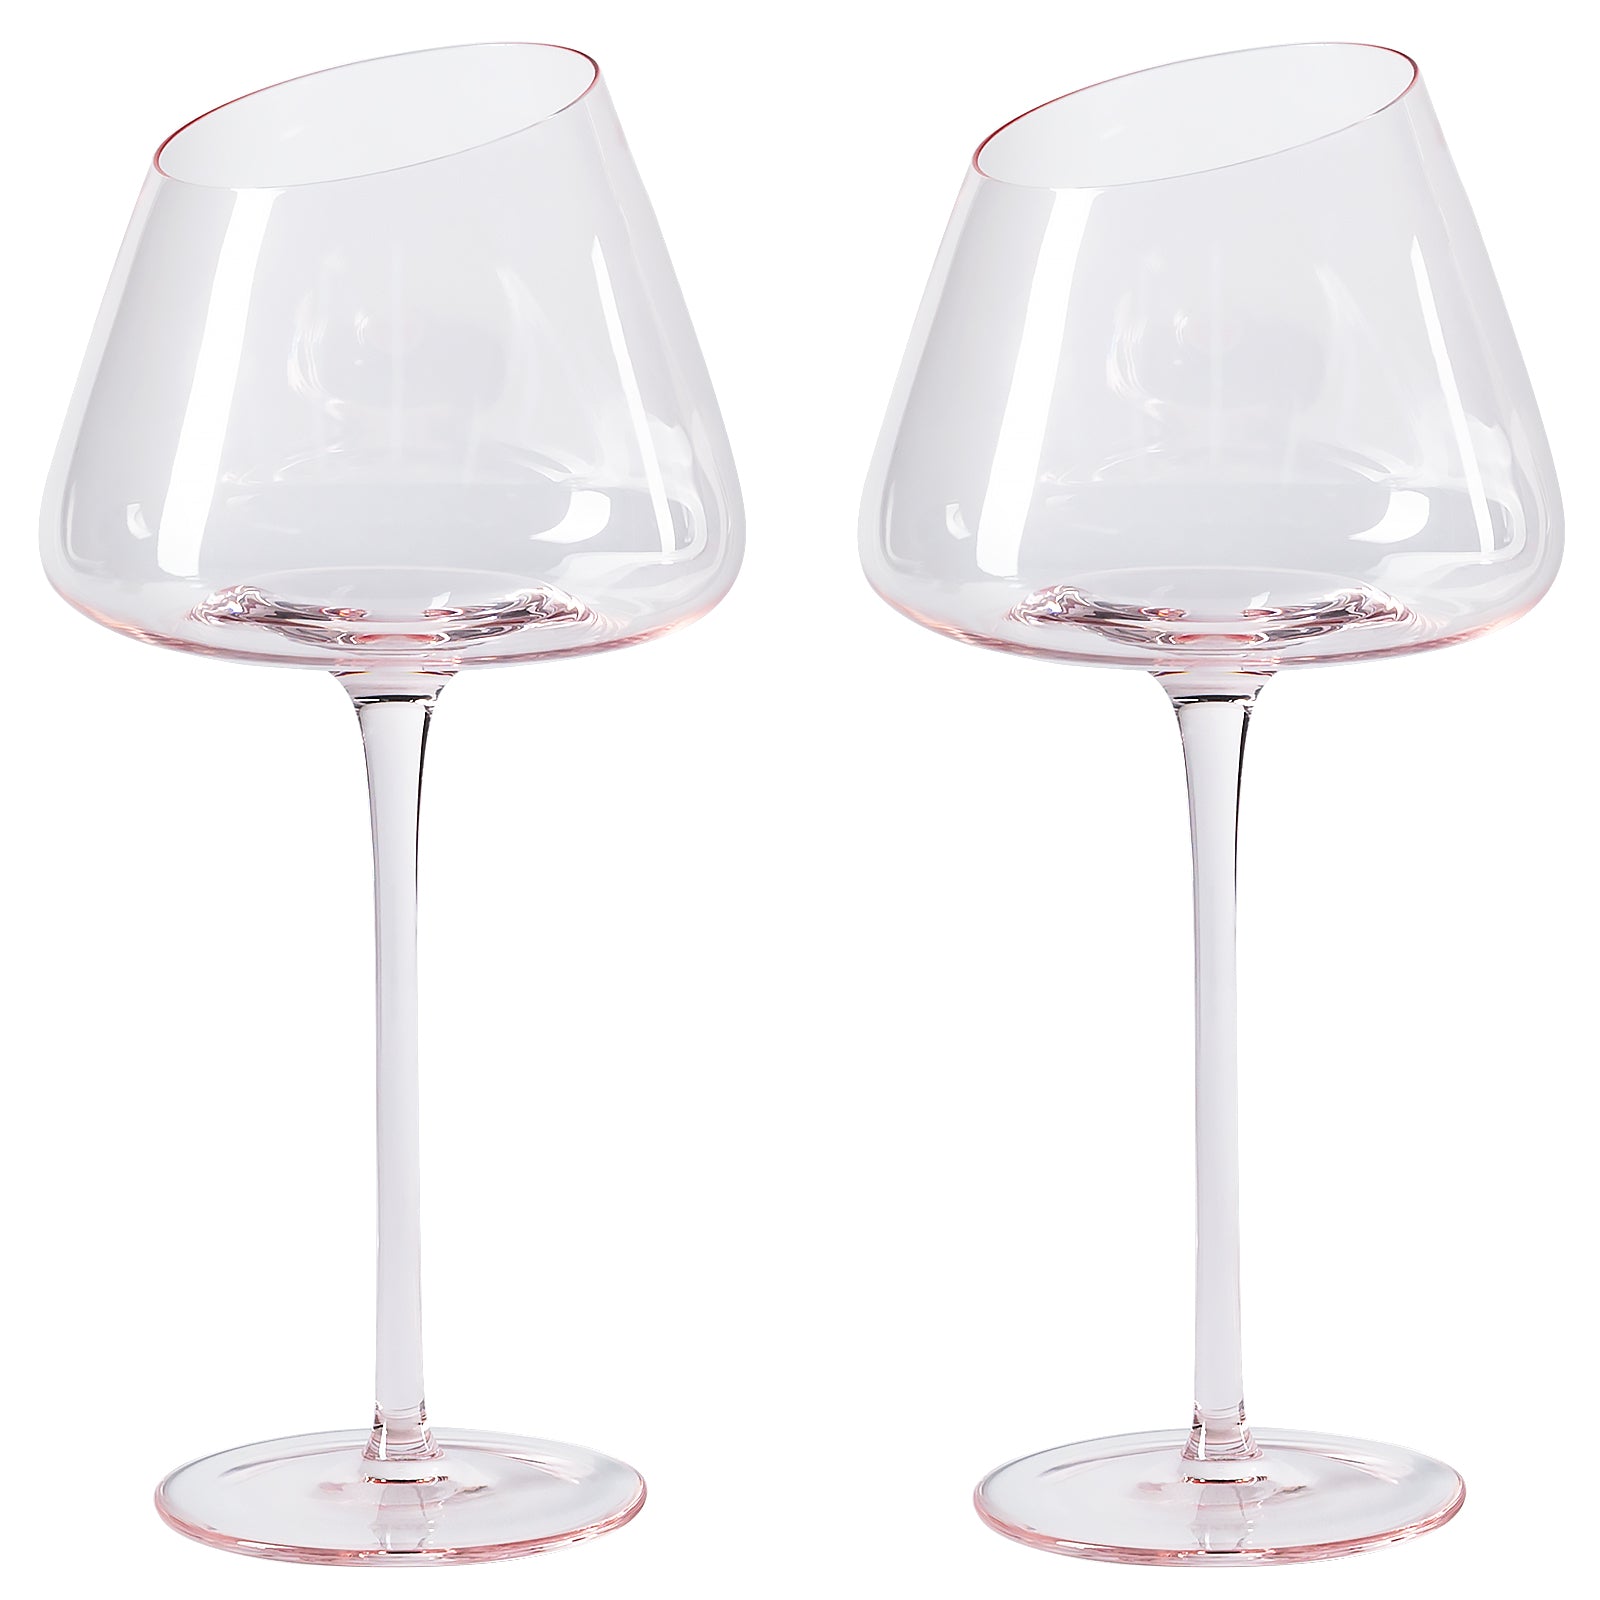 Wine Glasses with Gift Box - Set of 2